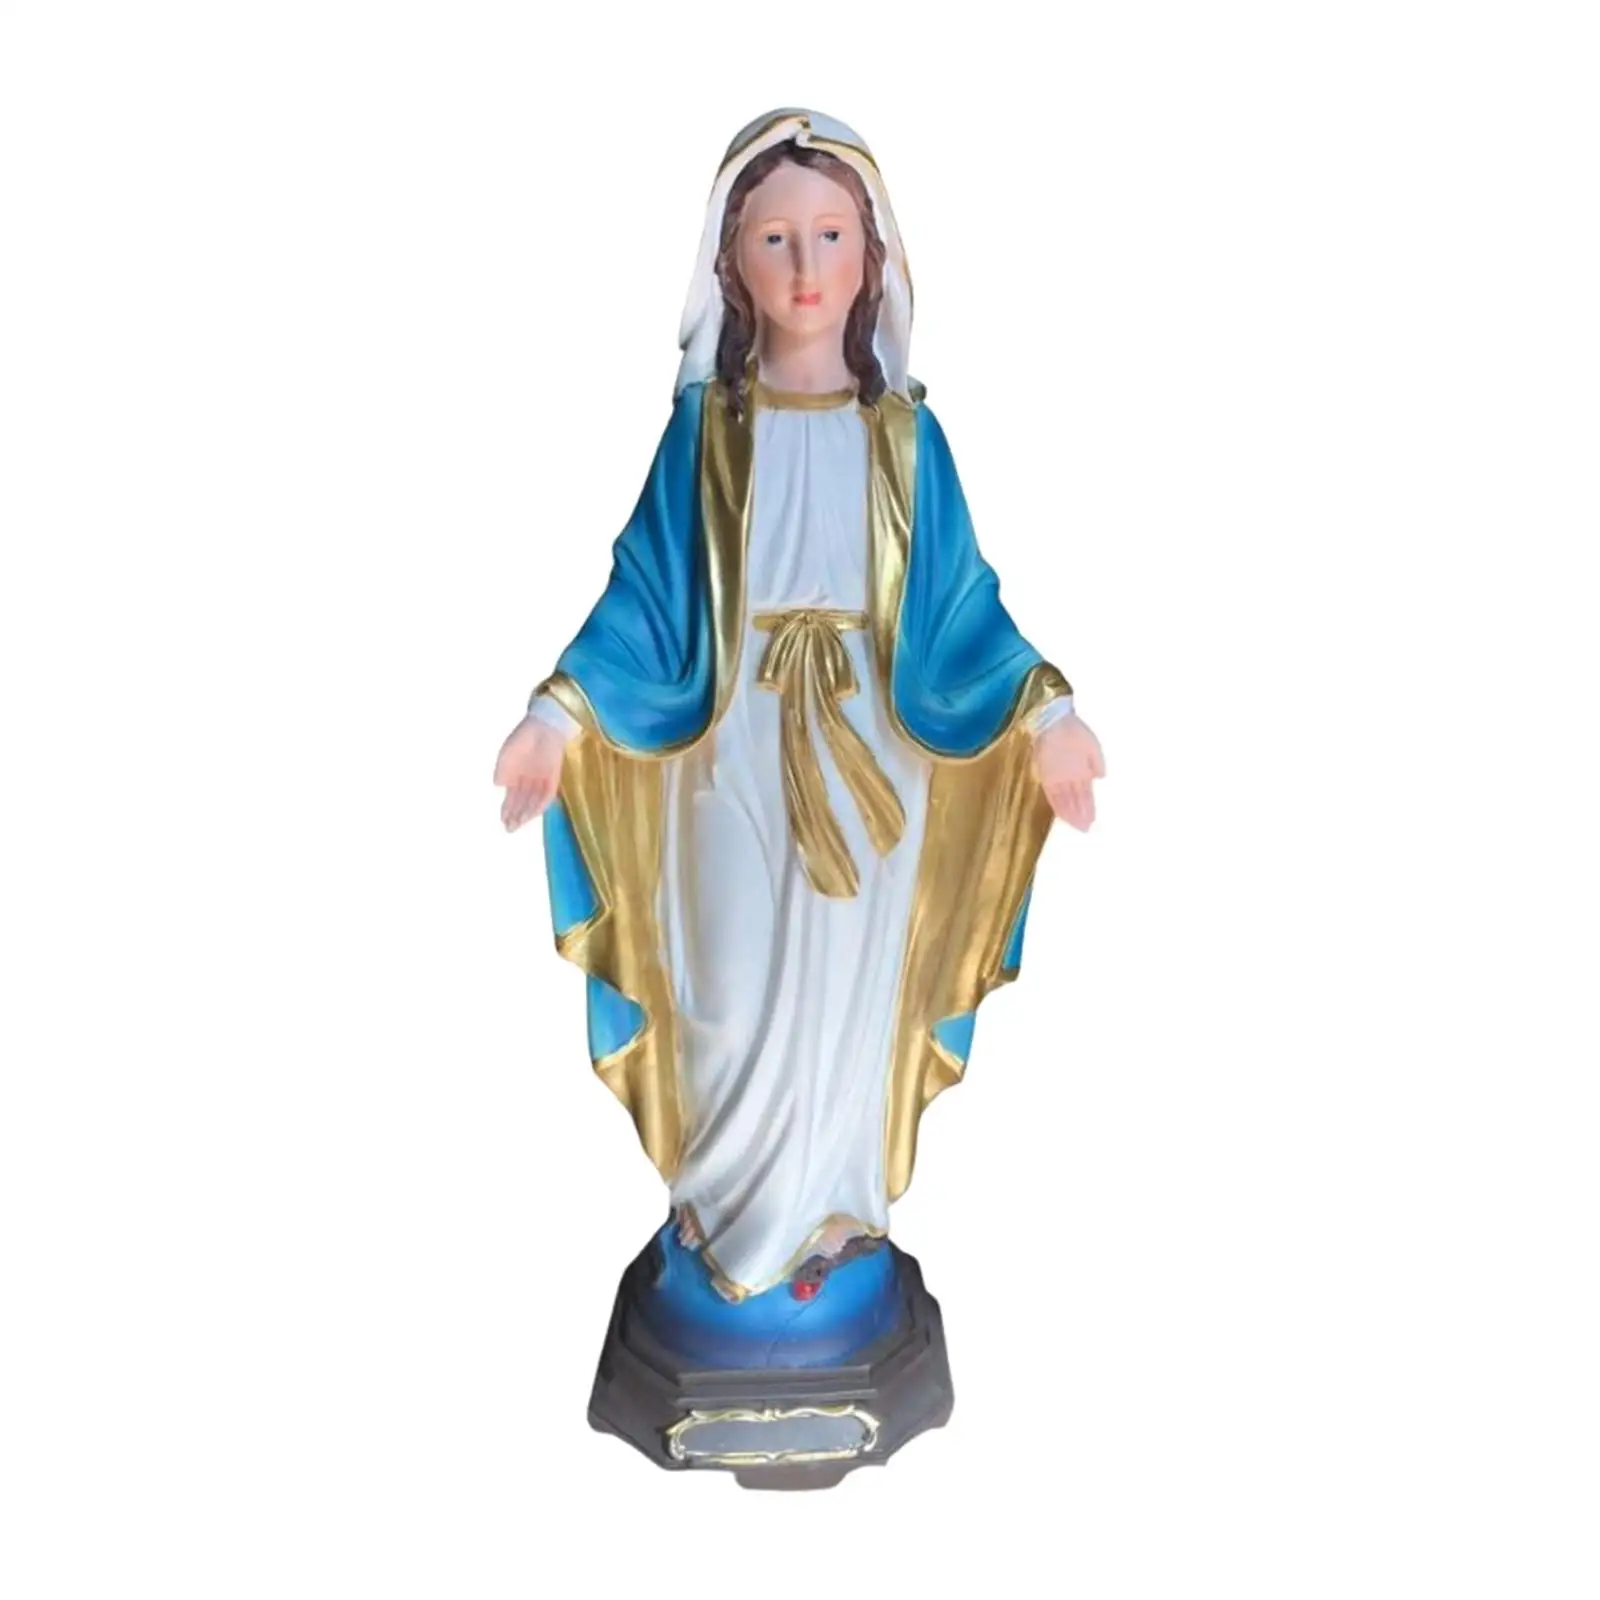 Holy Mother Mary Figurine Wedding Gift Dining Room Standing Statue Decorative Stable